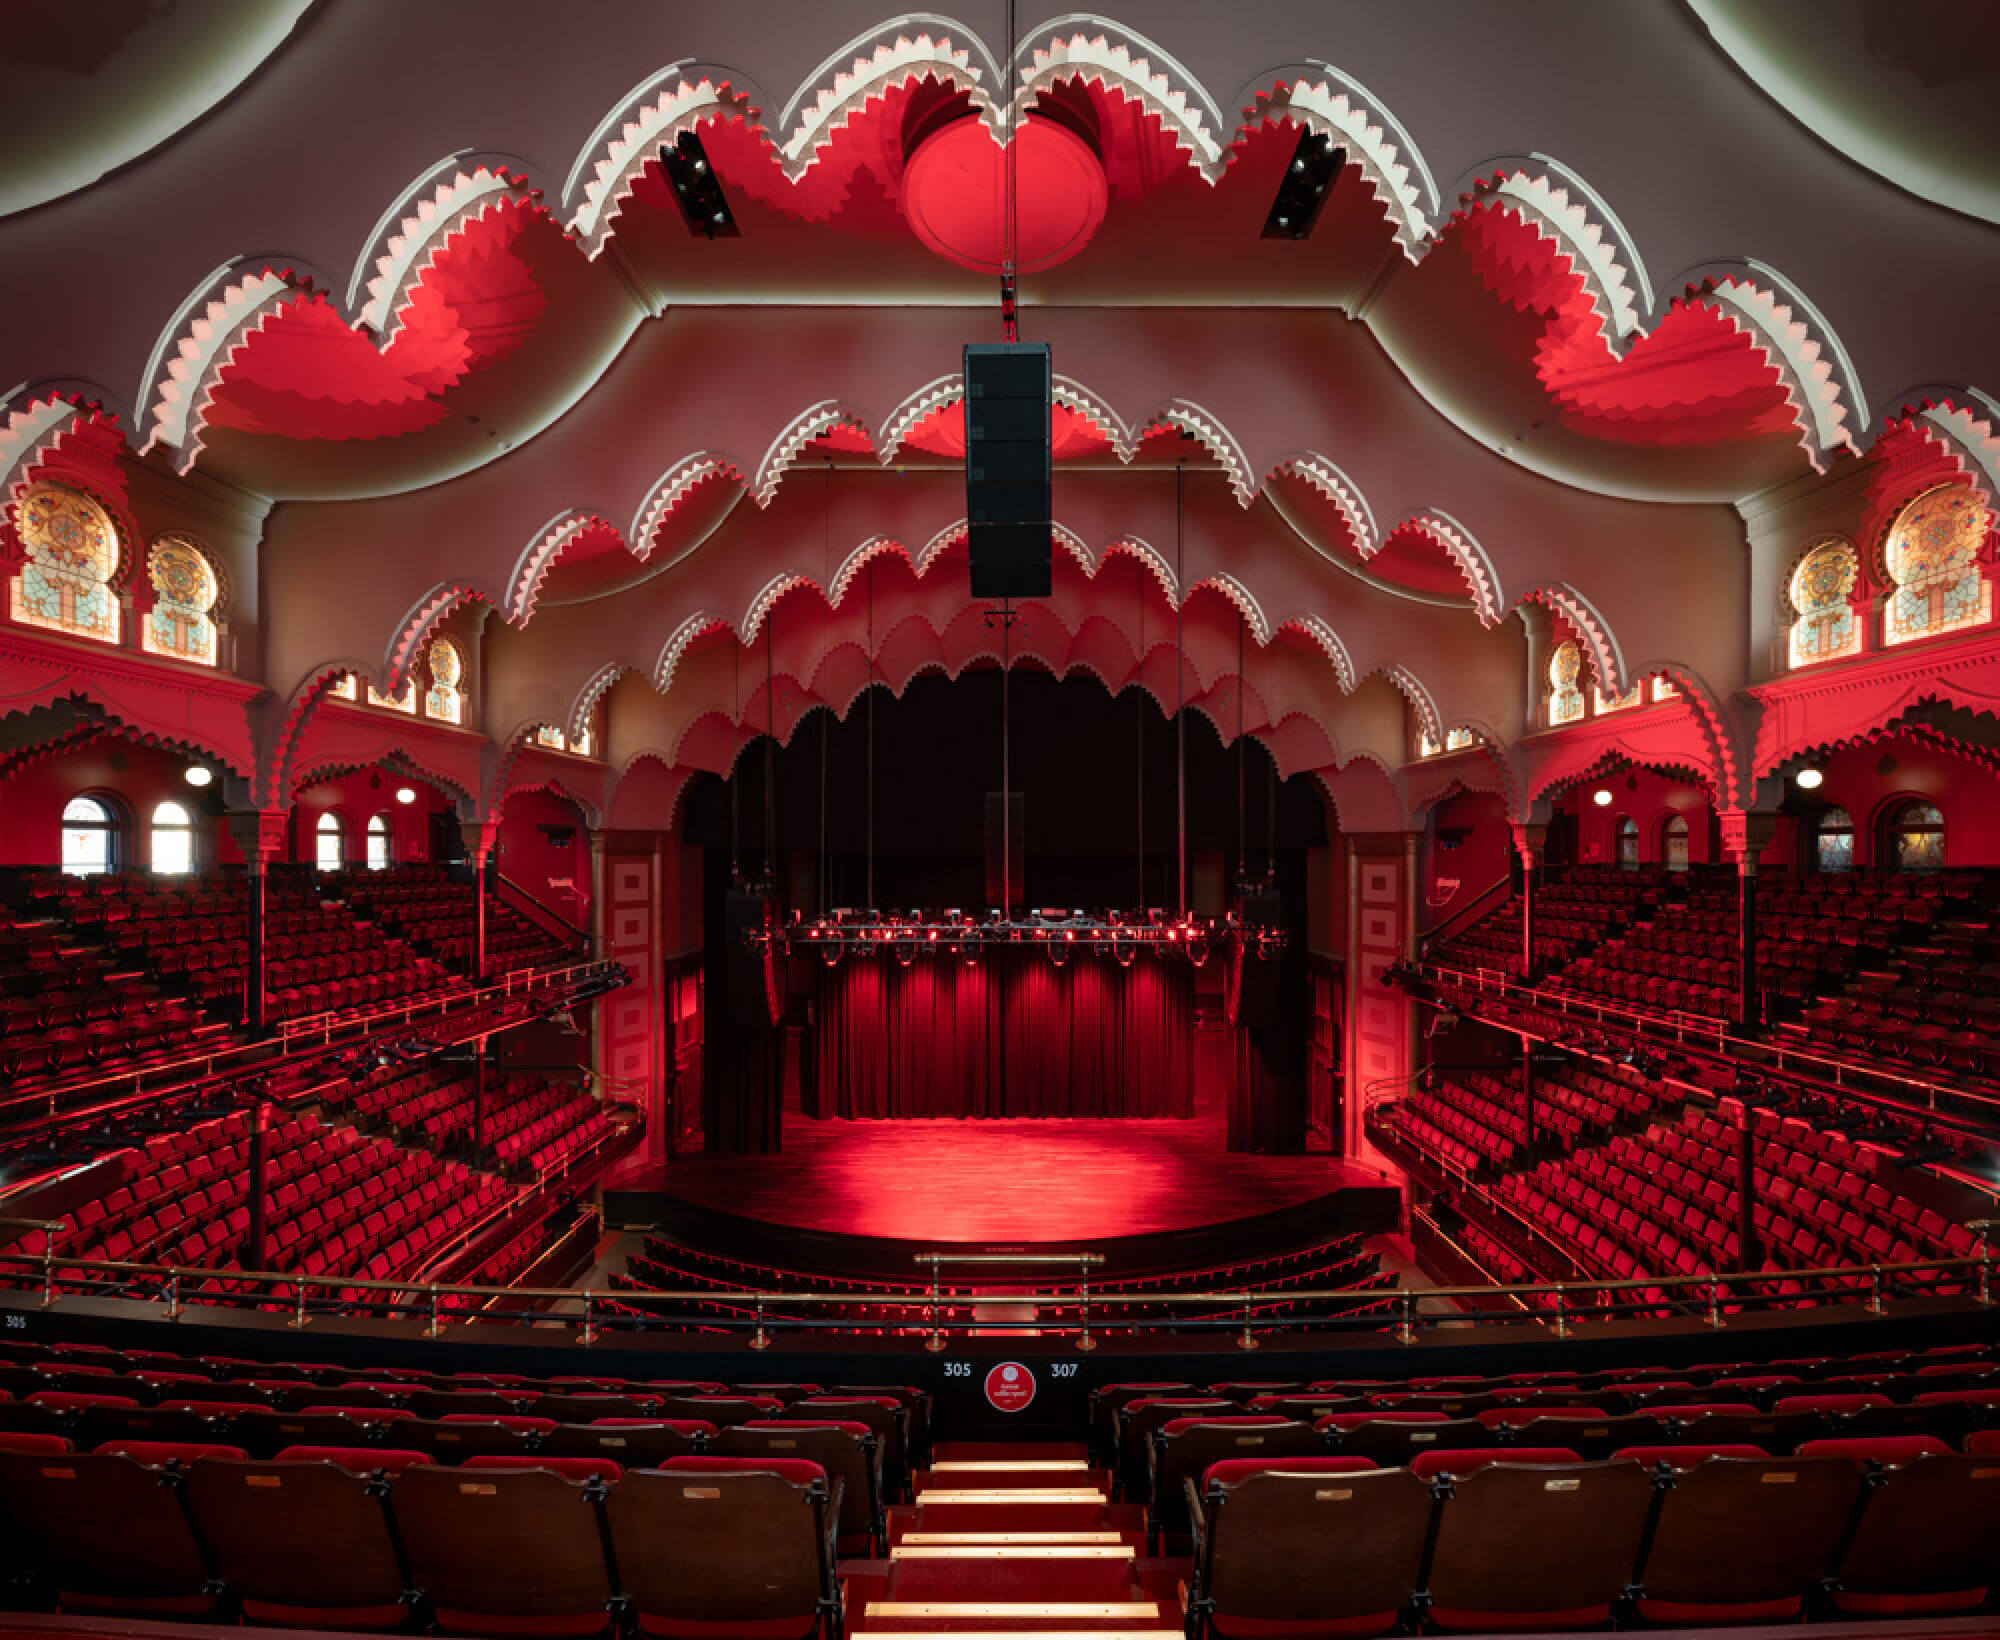 The interior of a music hall. The seating in the hall has red upholstery. On the ceiling of the hall are decorative archways that line up with the decorations on the stage in the center.